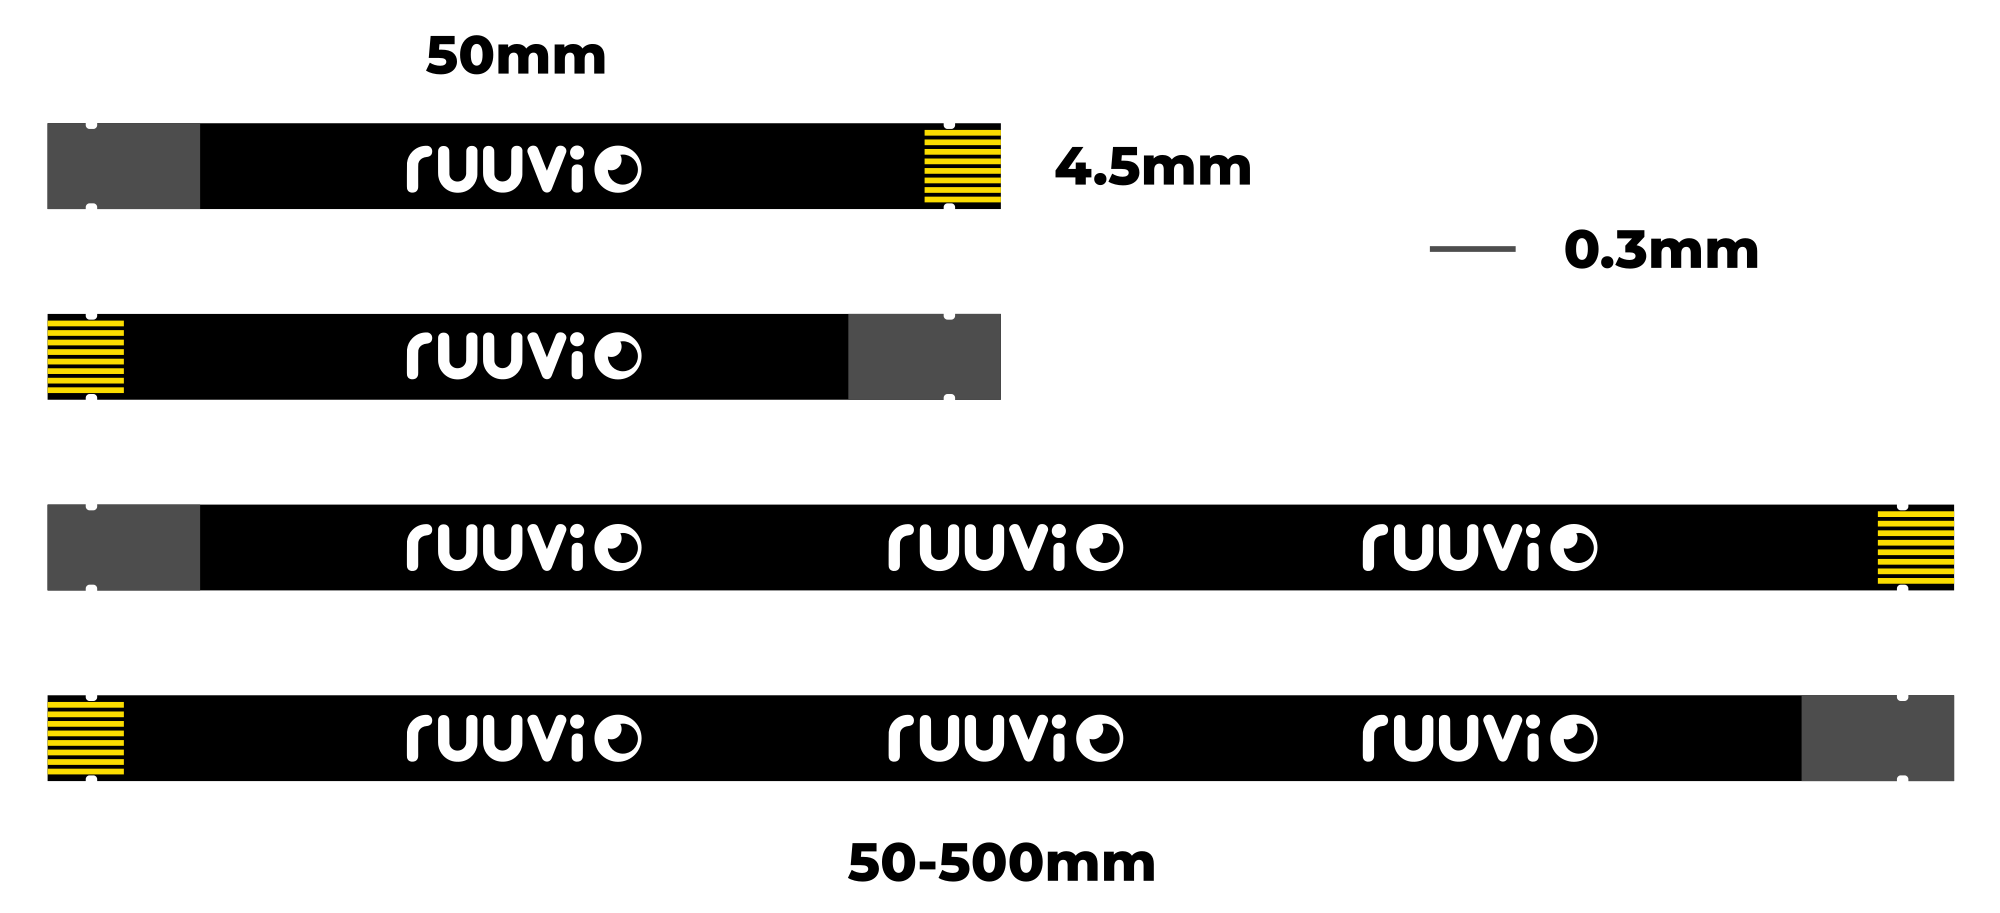 Ruuvi Connector cables